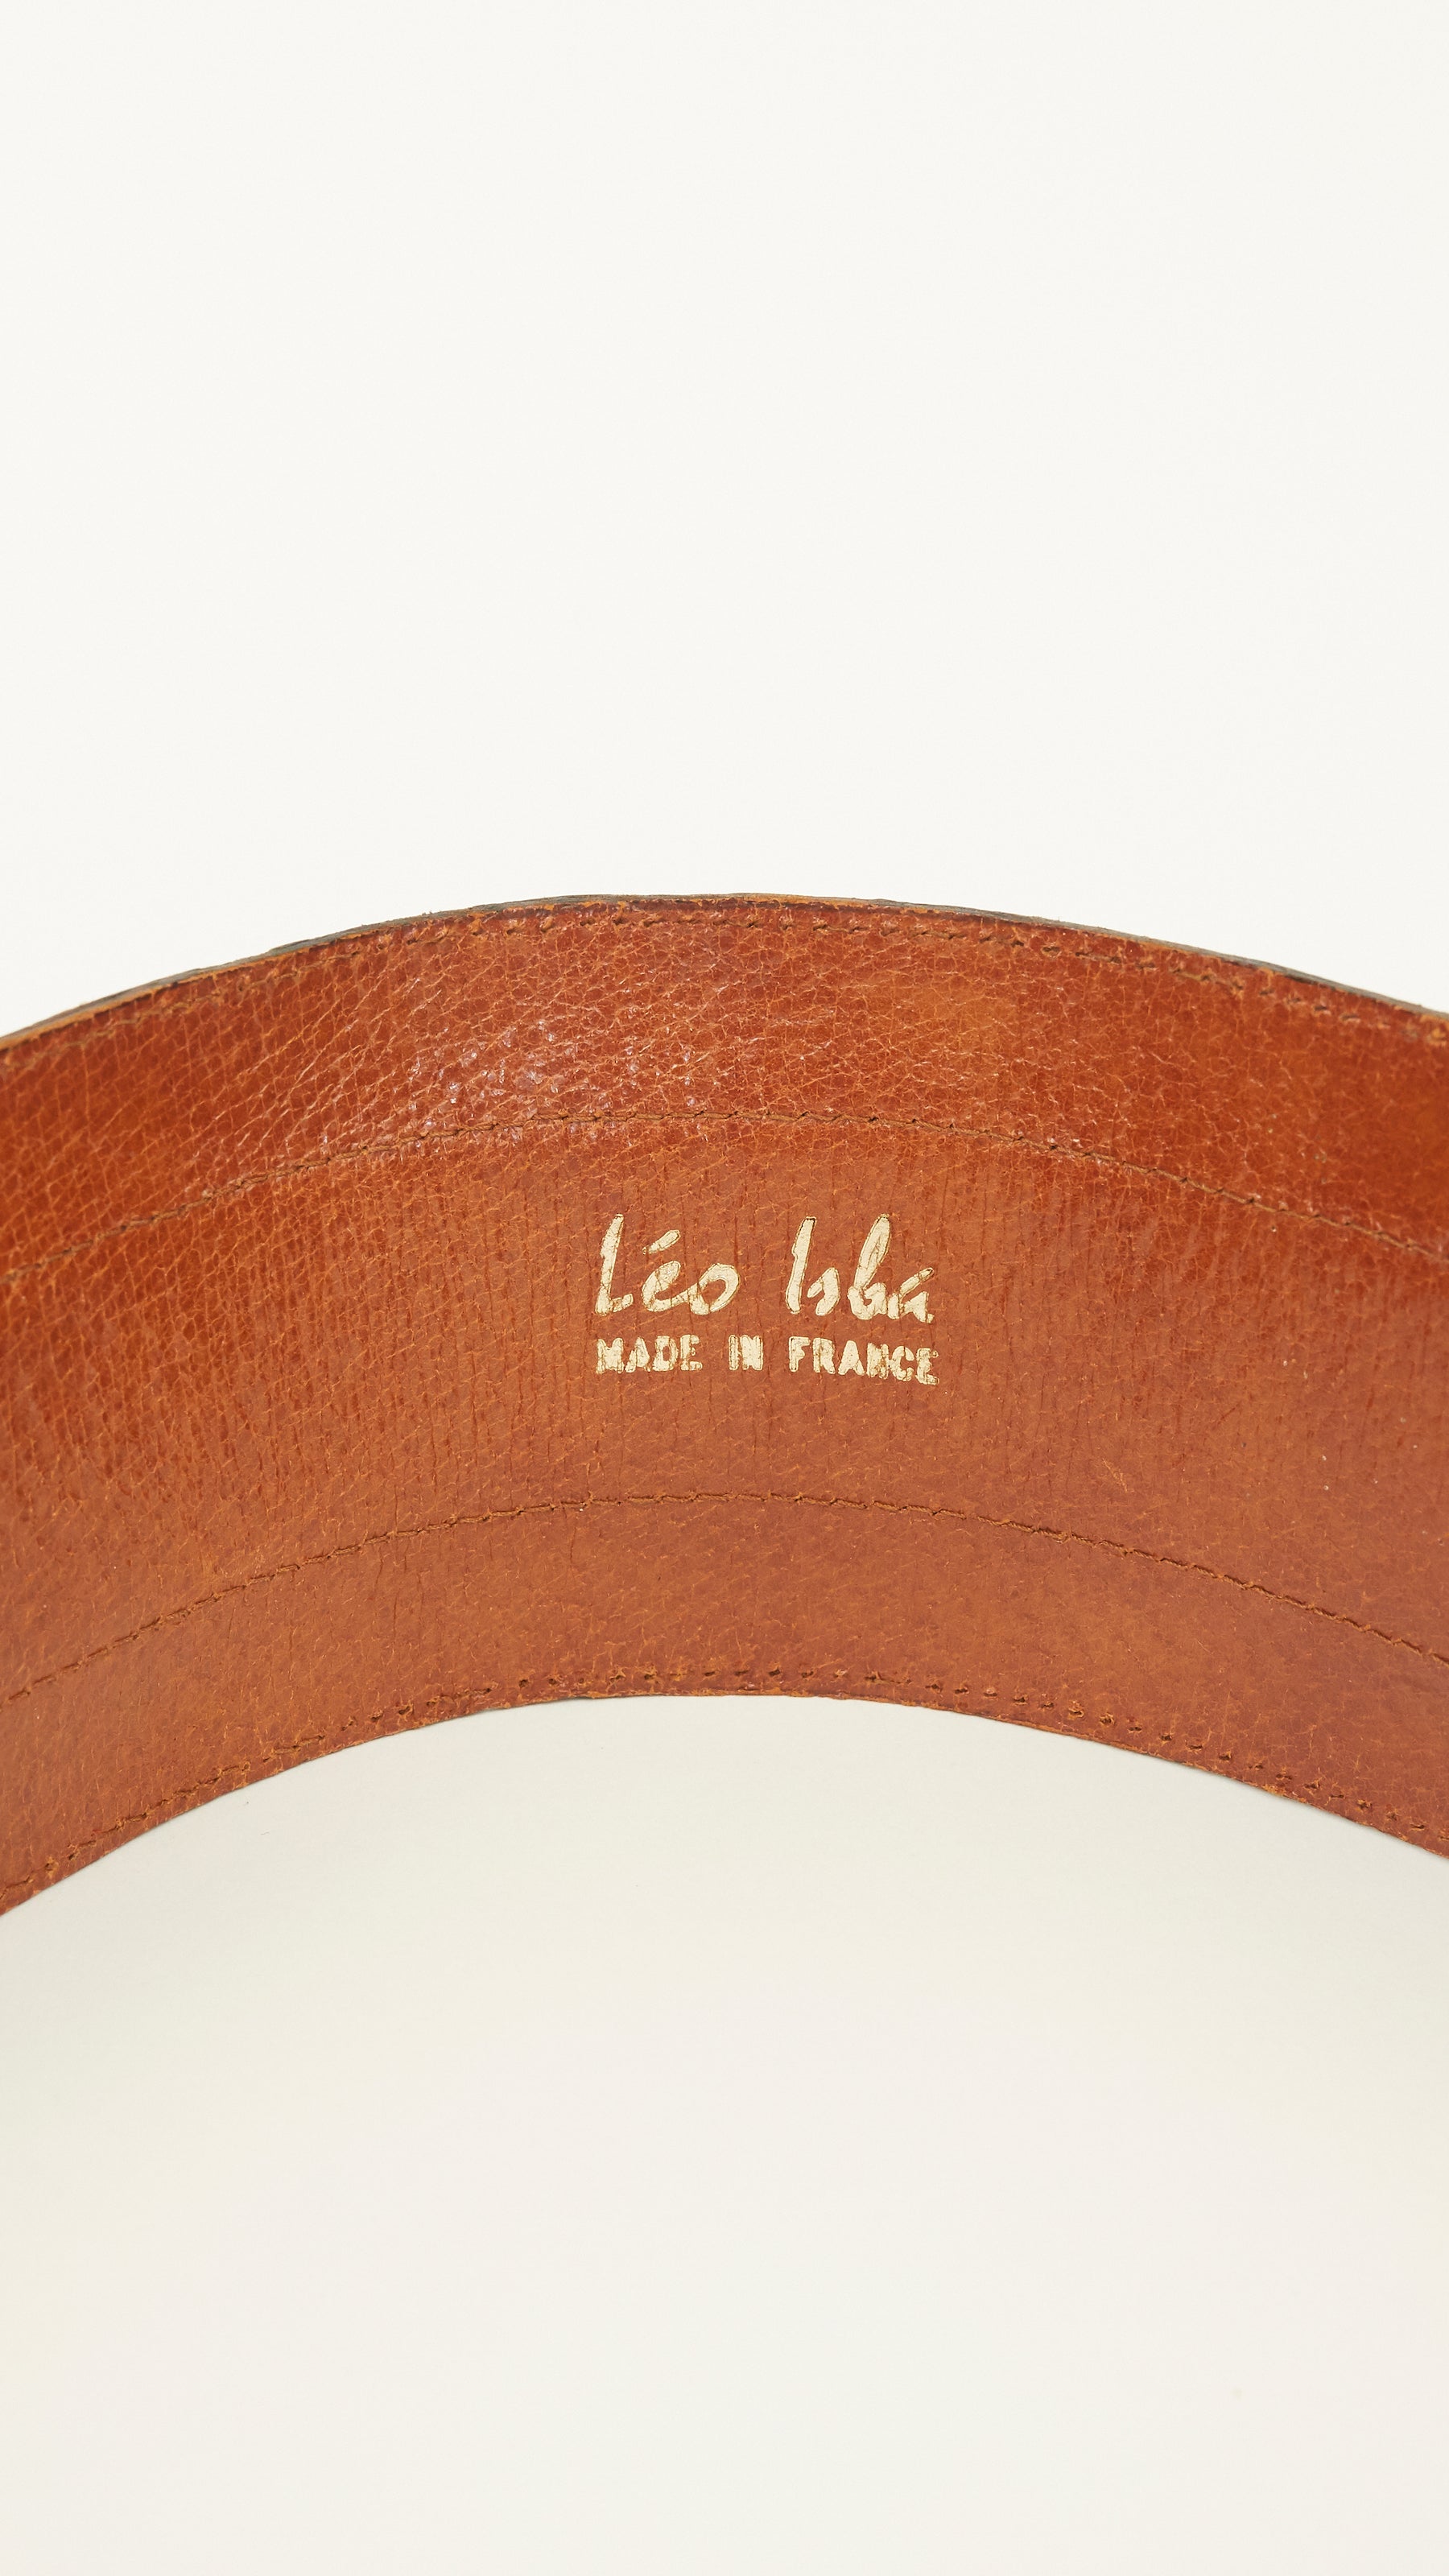 Lot - Leo Isba Made in France textured designer leather belt with